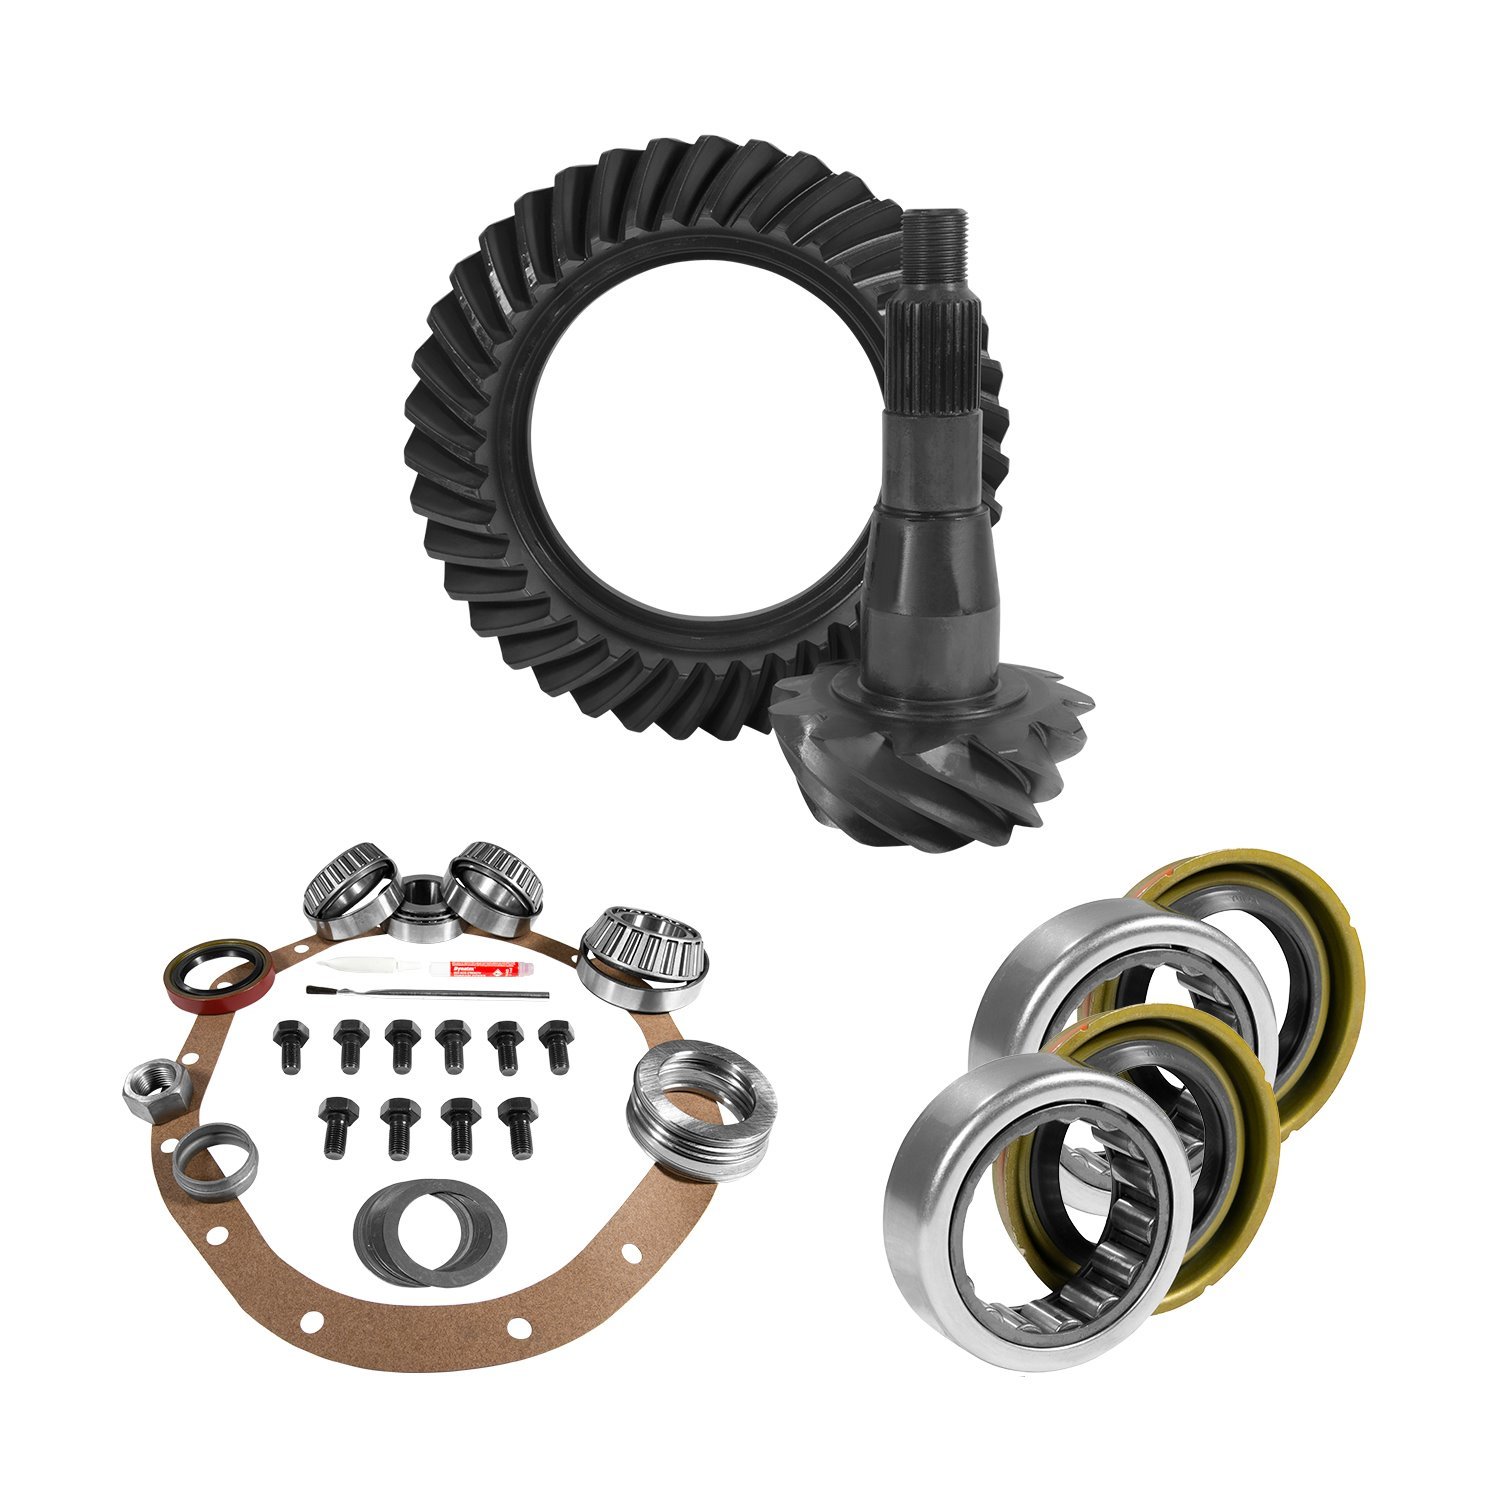 USA Standard 10789 9.25 in. Chy 3.91 Rear Ring & Pinion Install Kit, 1.705 in. Axle Bearings & Seal